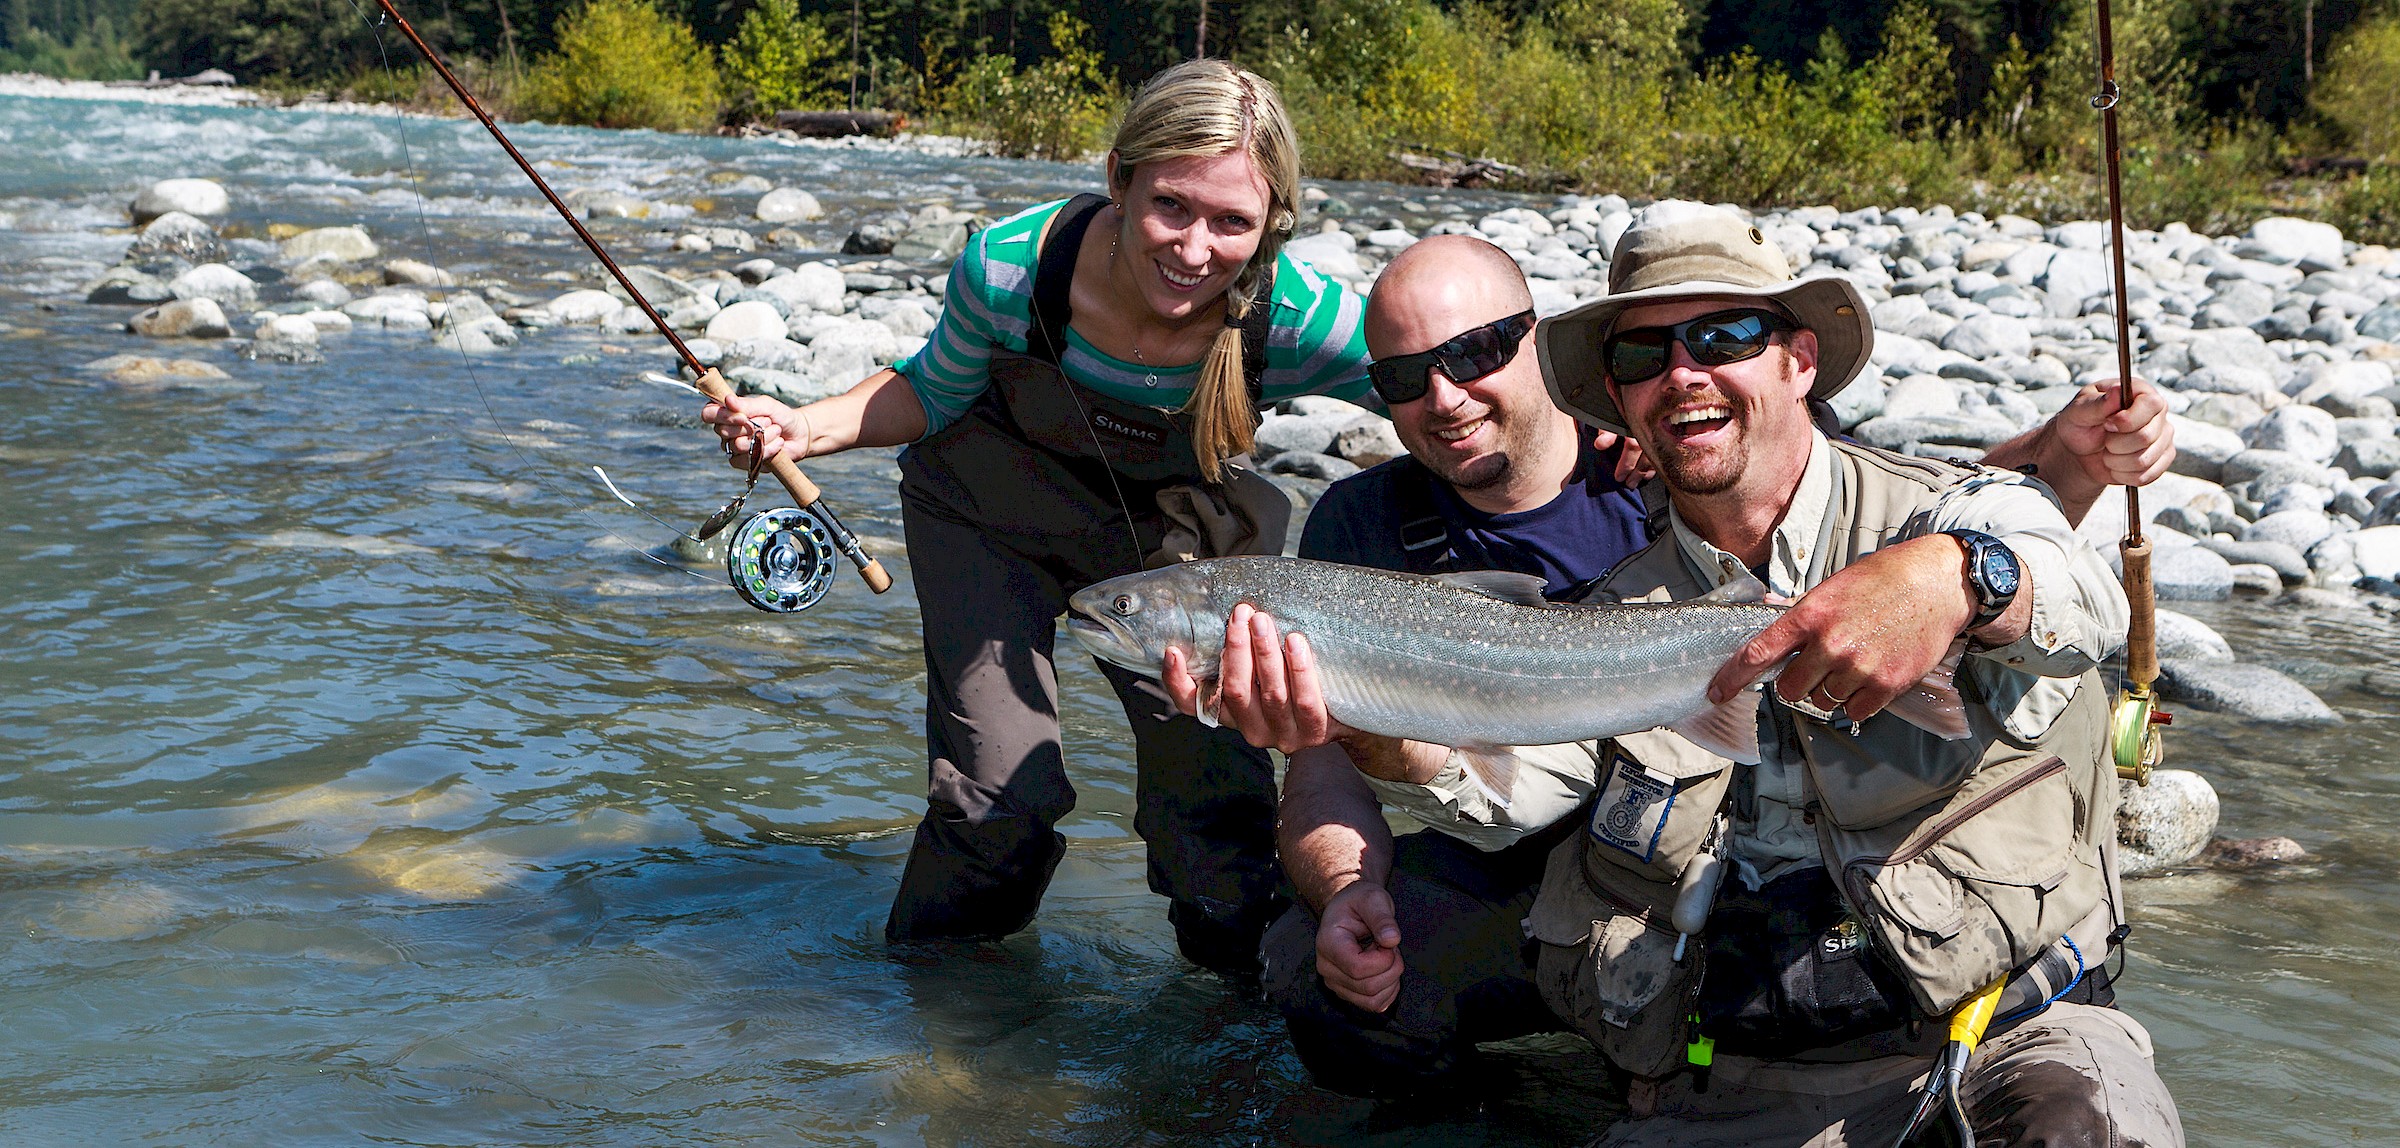 Happy fishing group in a river showing off their catch